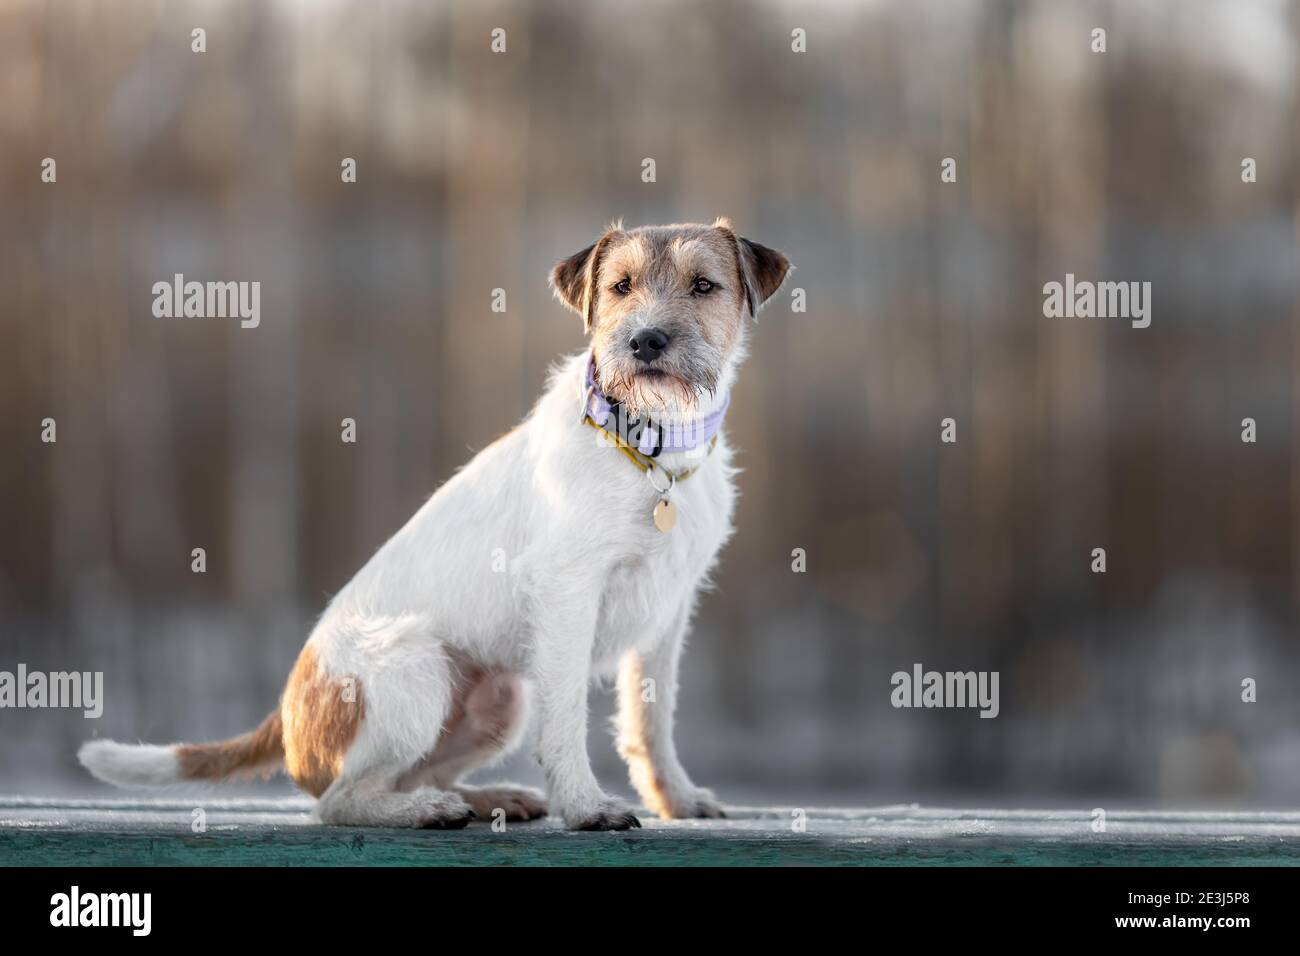 Portrait of young dog of parson russell terrier breed sitting on bench outdoors Stock Photo